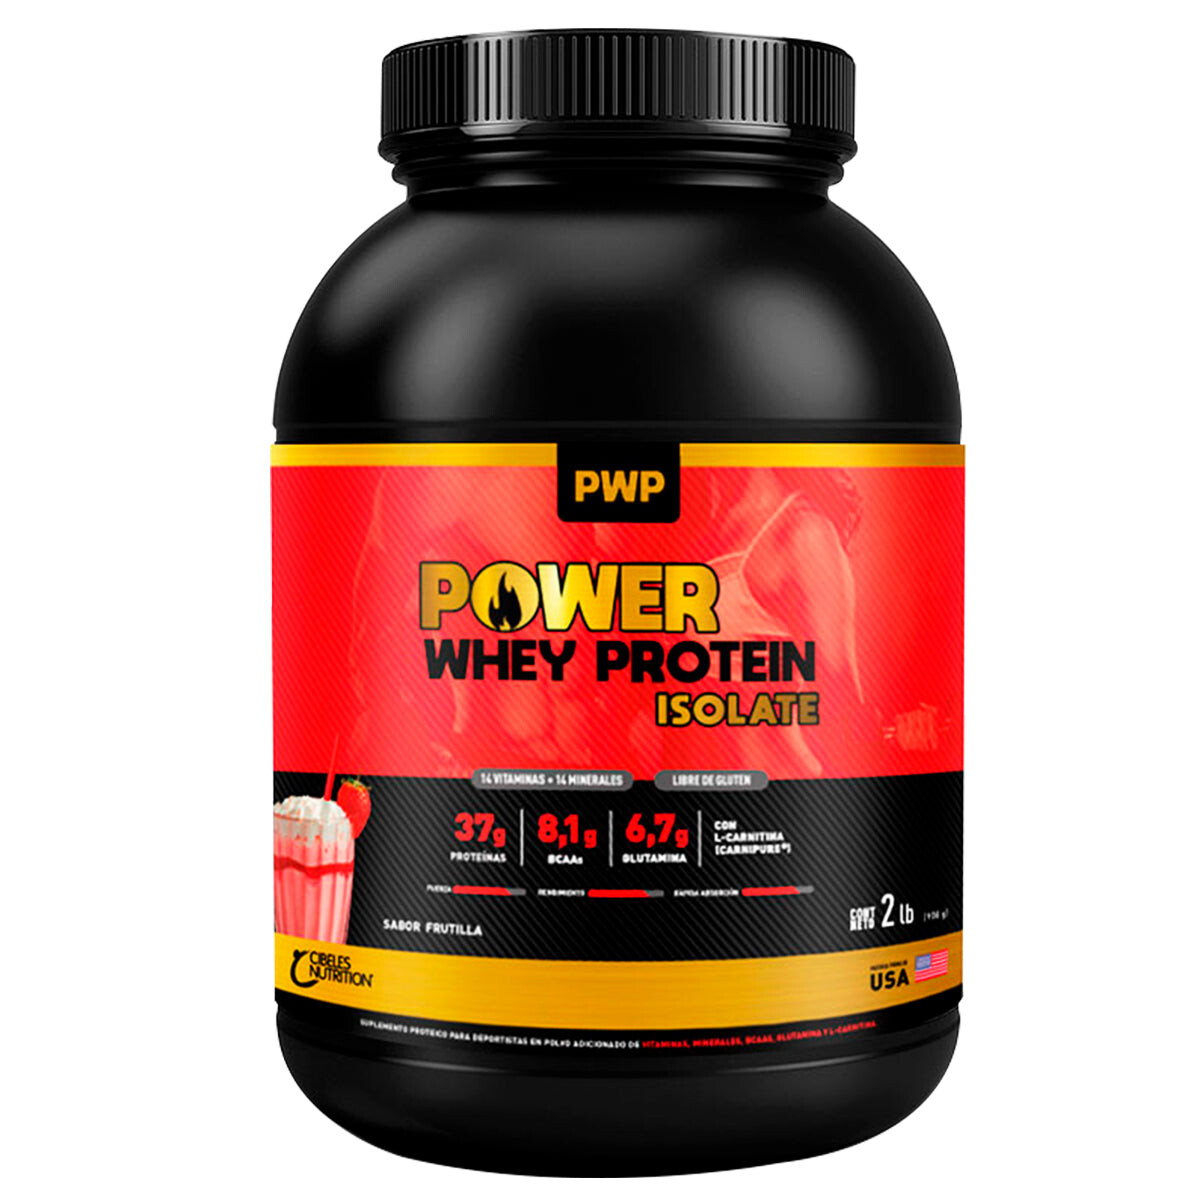 Suplemento Pwp Whey Protein Isolate 908g + Theraband! 